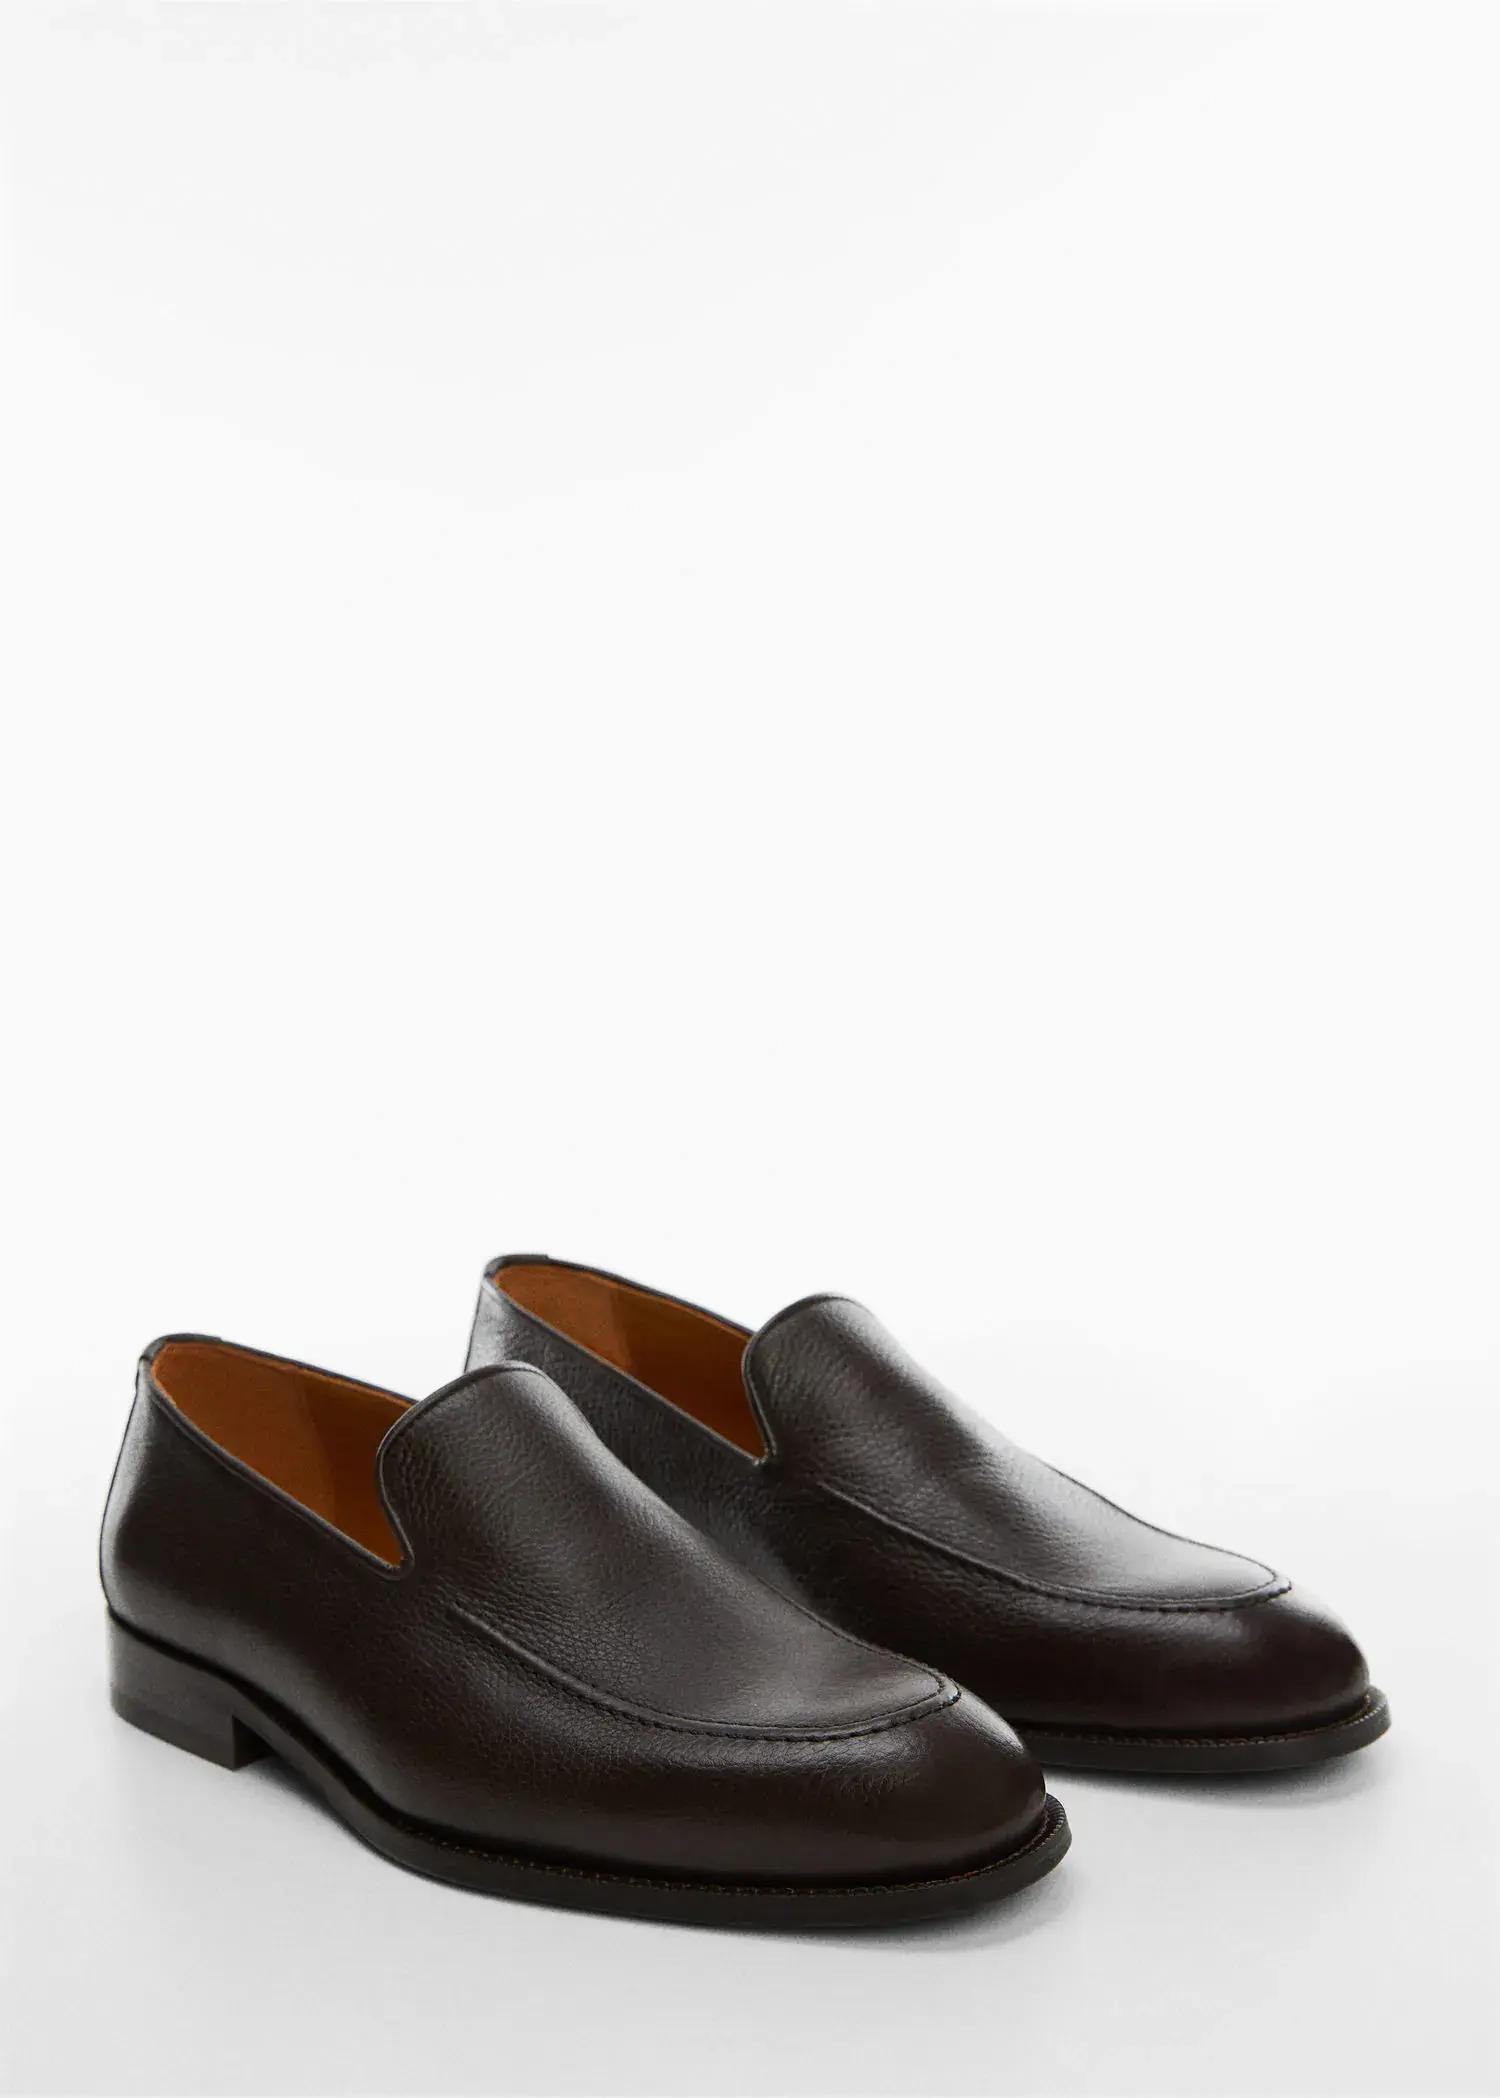 Mango Minimalist leather moccasins. a pair of black loafers on top of a white surface. 